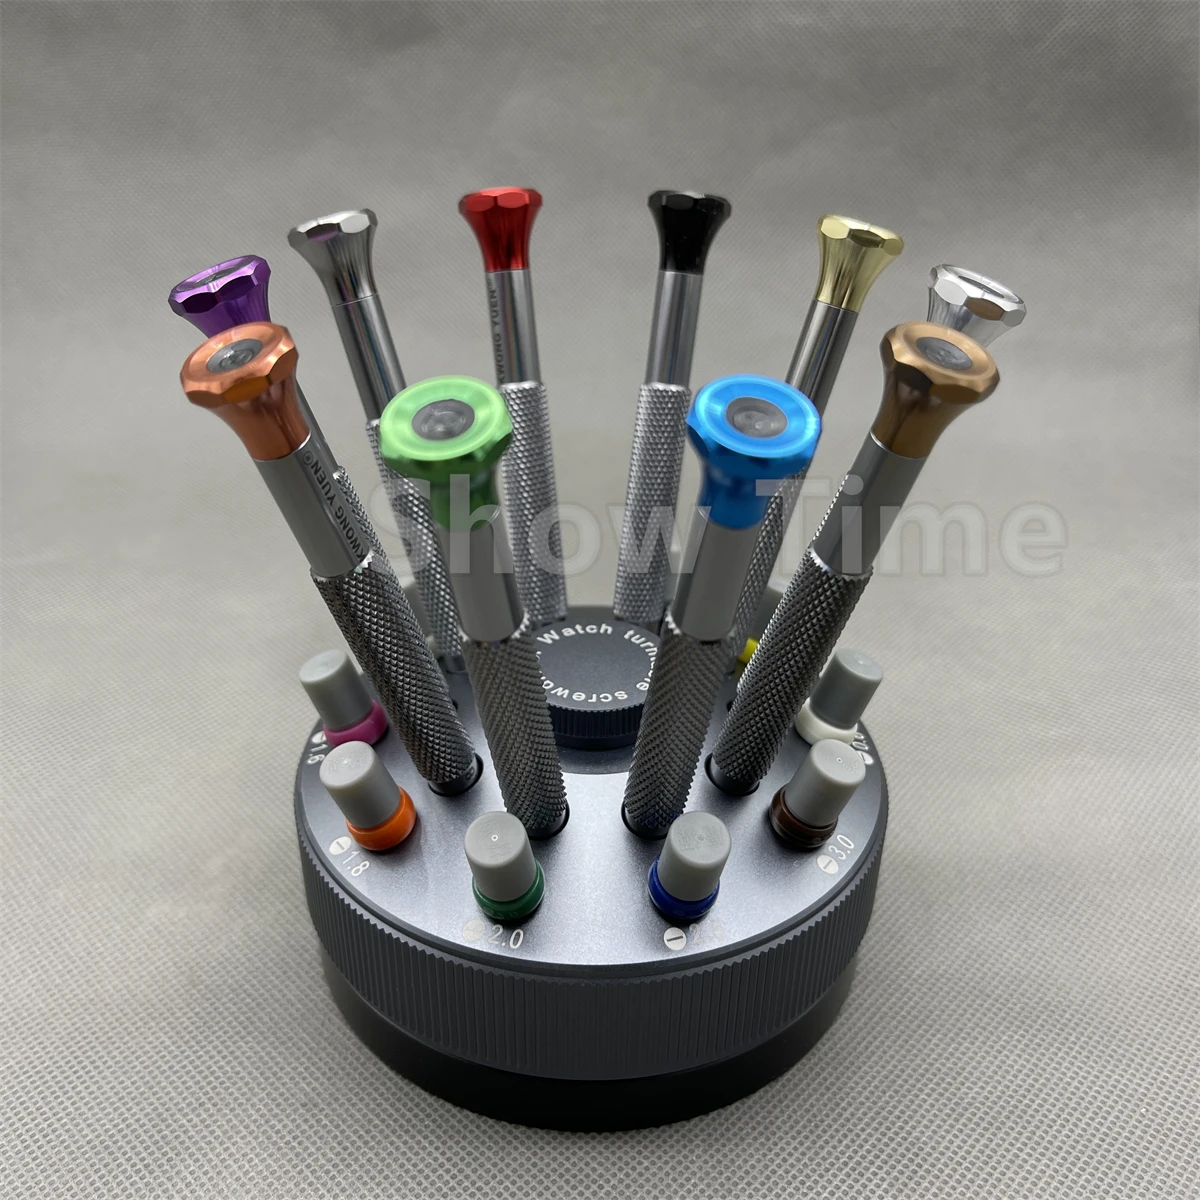 

New! Good quality 316L stainless steel non-slip watchmakers ergonomic 10 piece screwdriver set bold handle